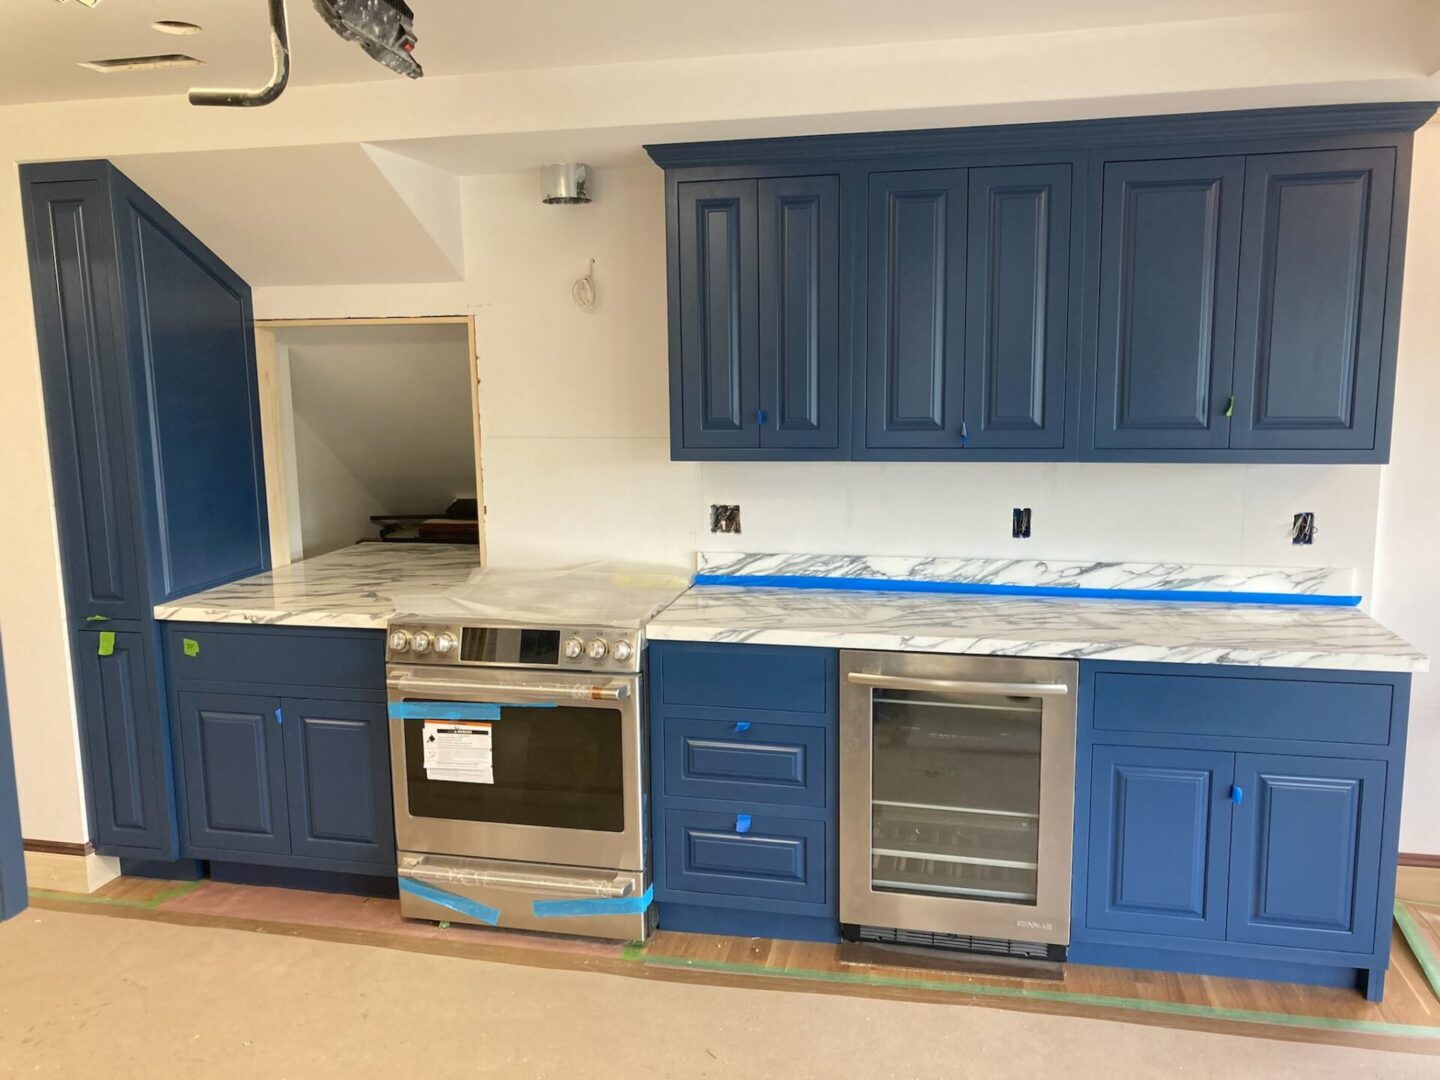 Close view of the blue kitchen cabinets